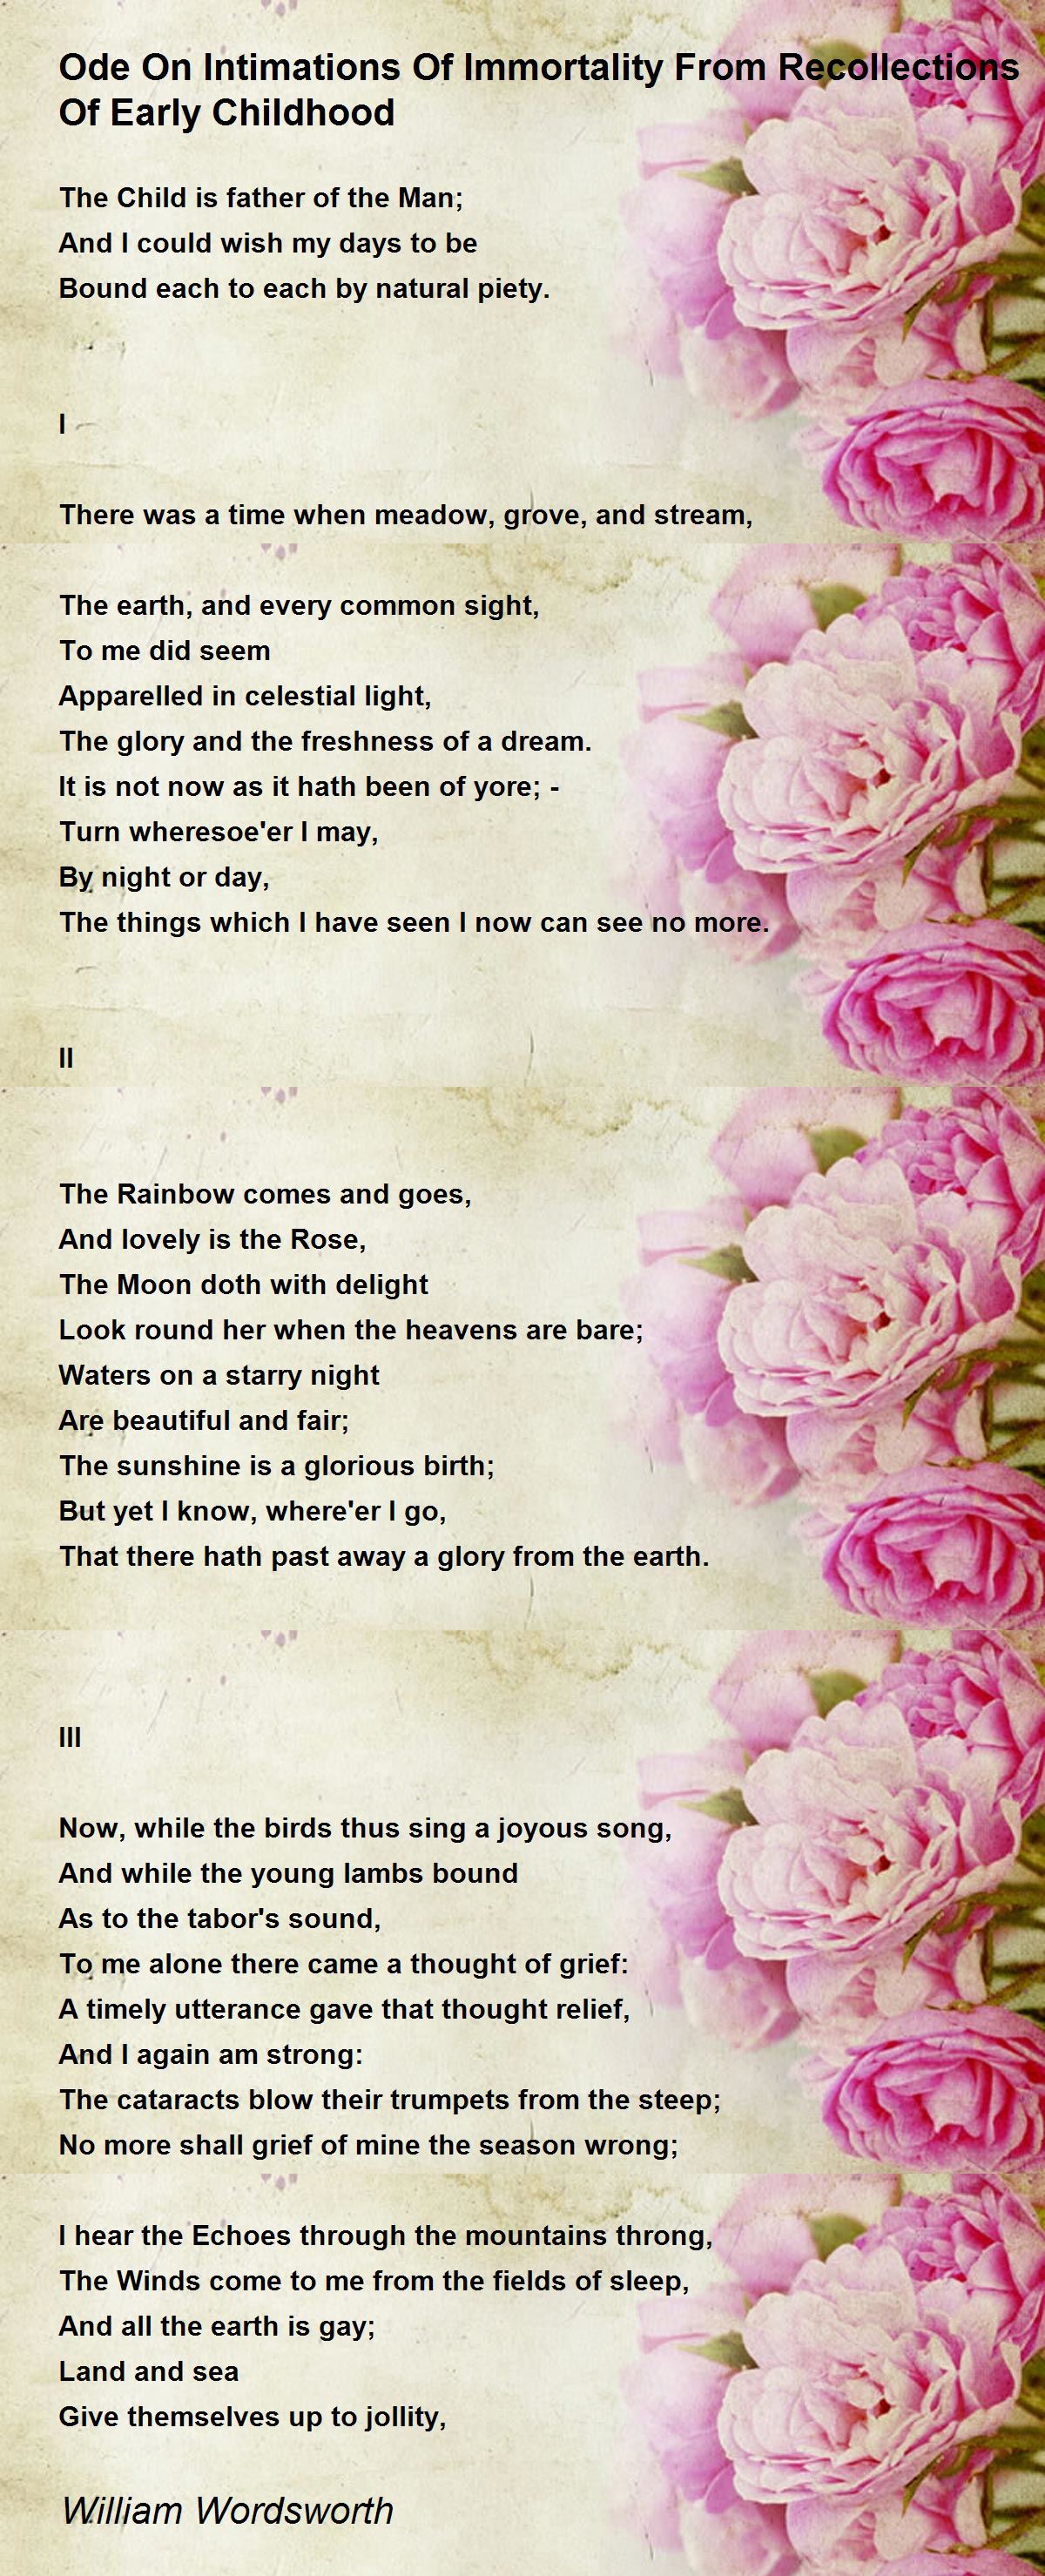 ode to immortality william wordsworth